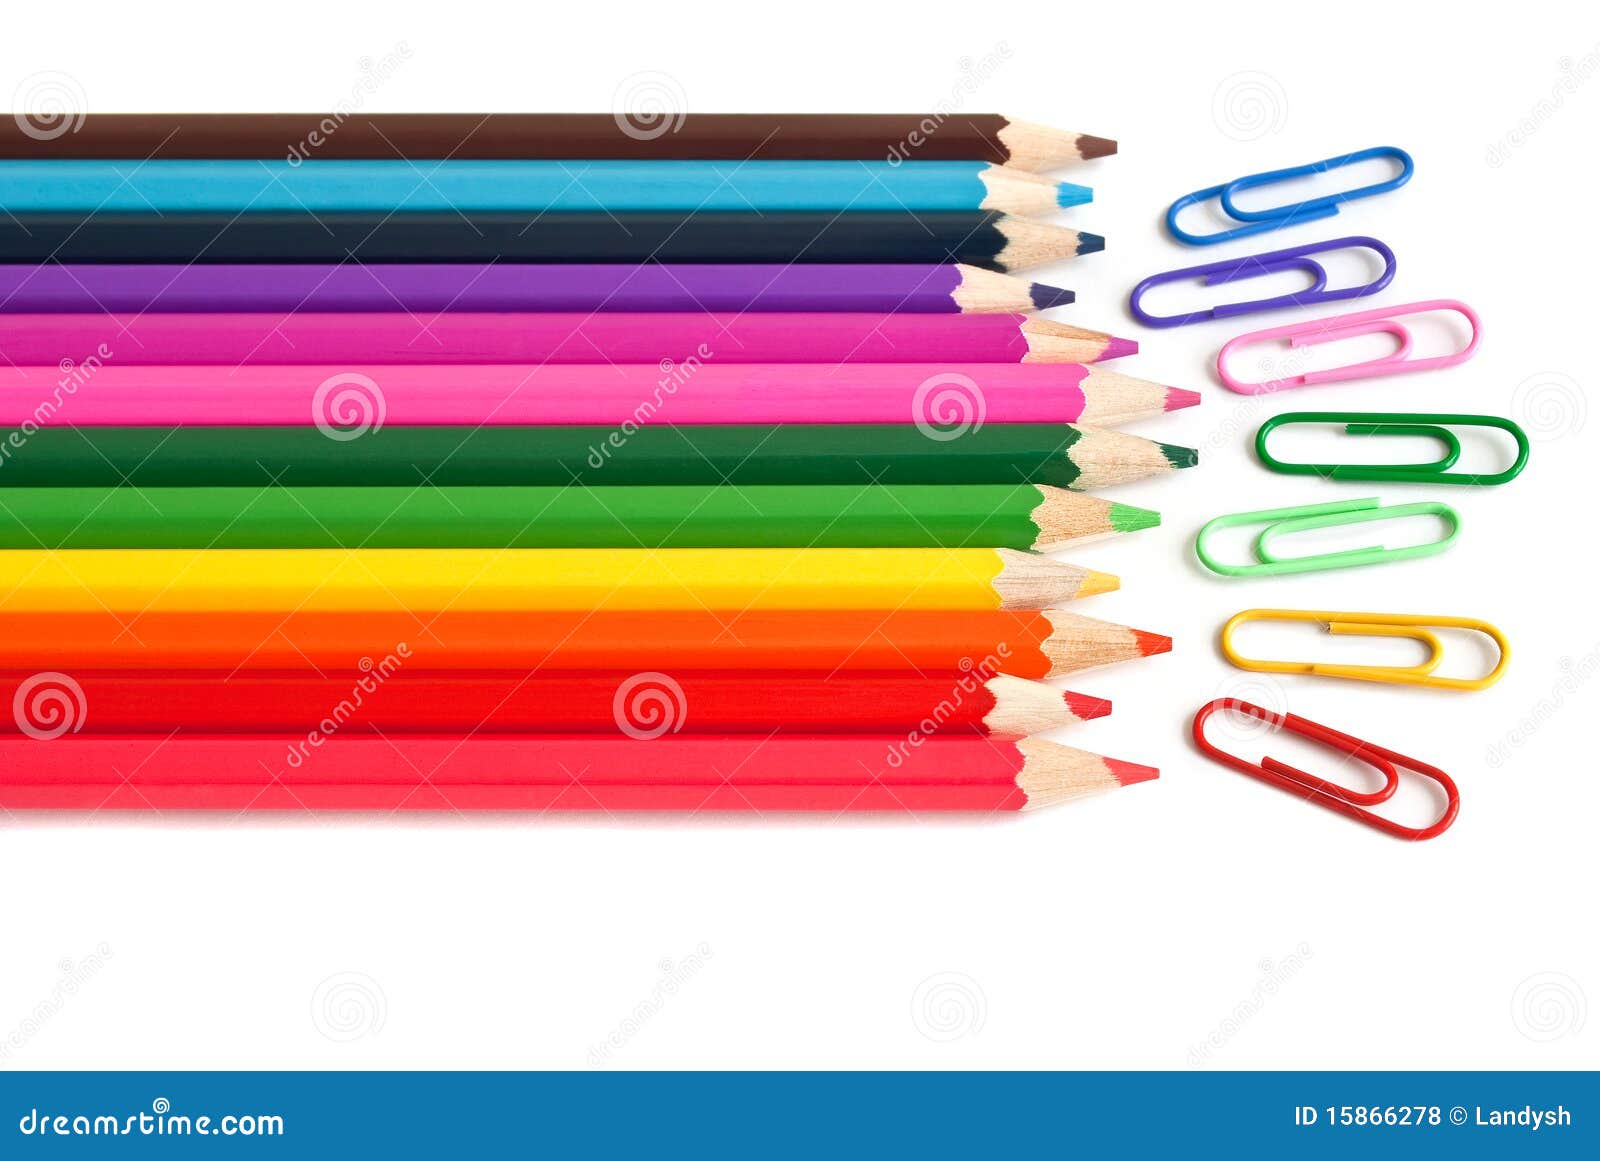 color pencils and paper clips, office stationery